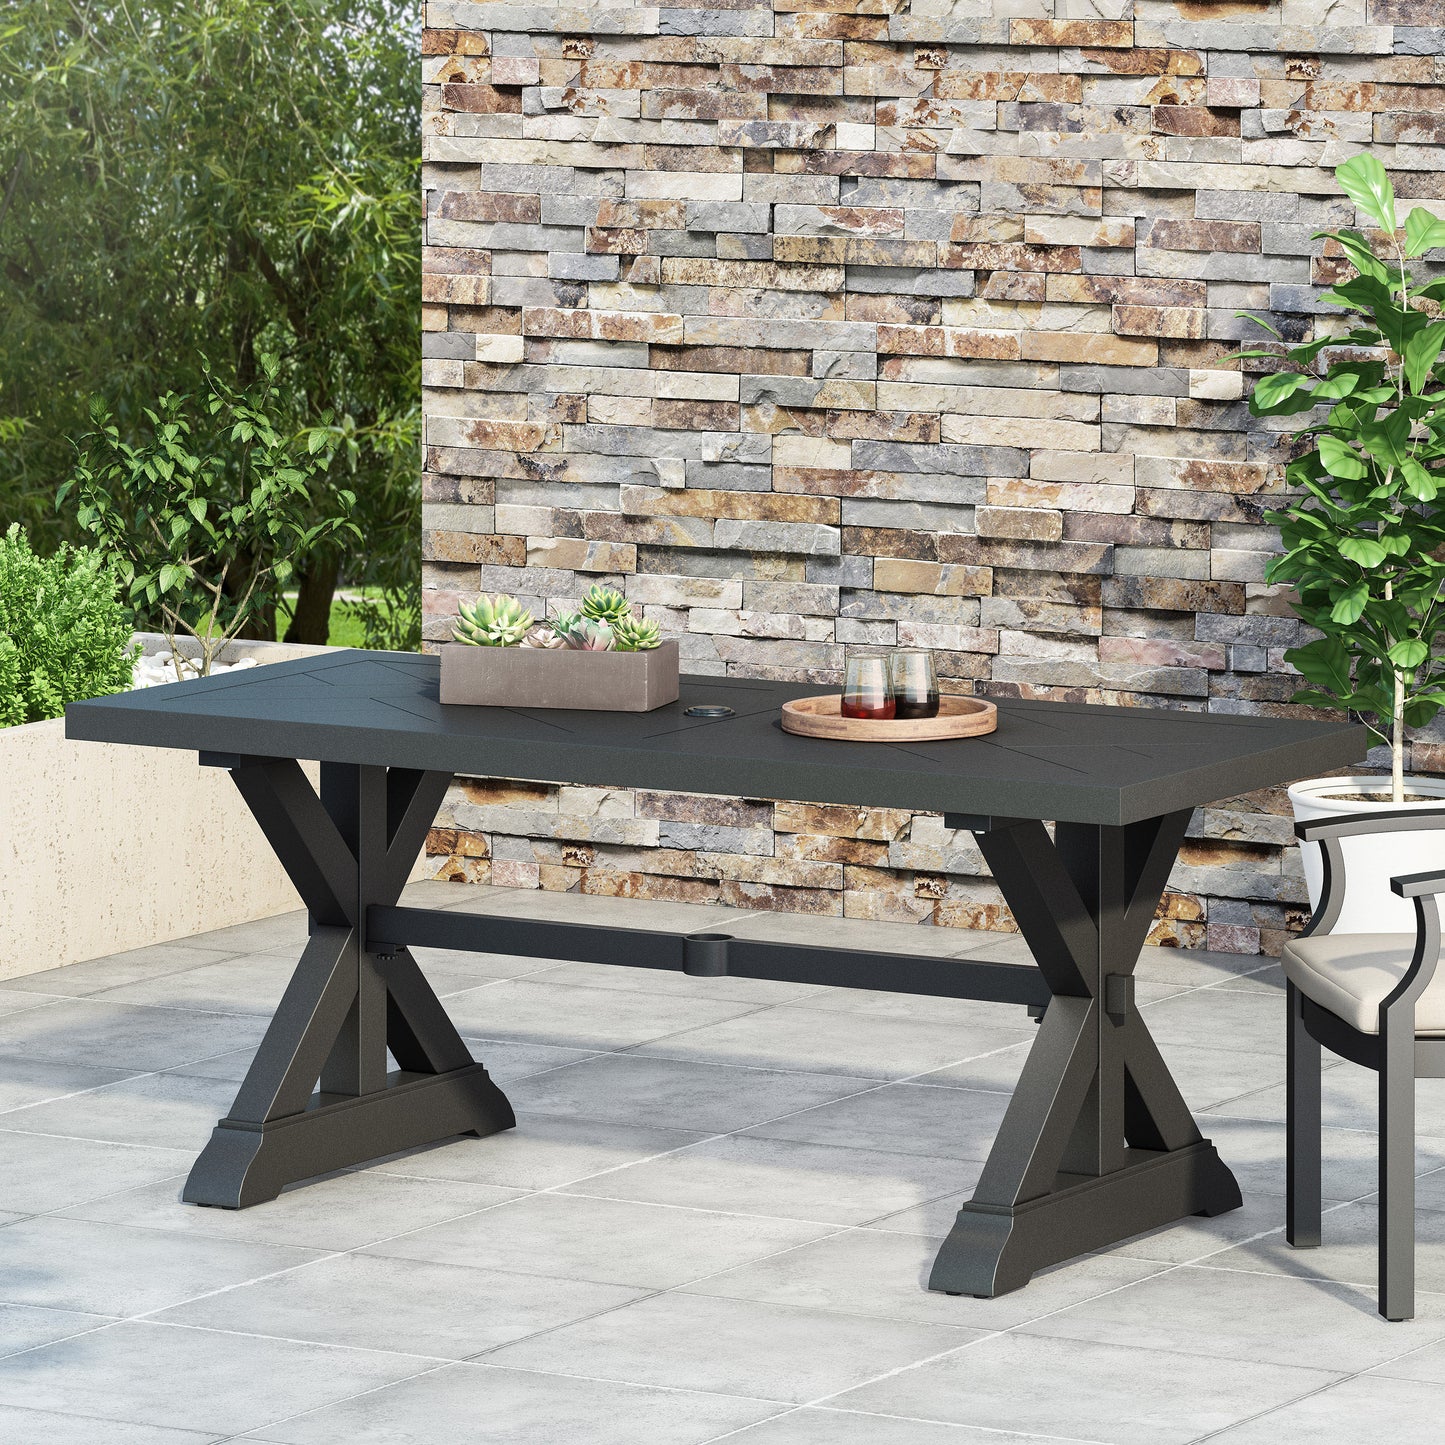 Tyrion Outdoor Aluminum Dining Table